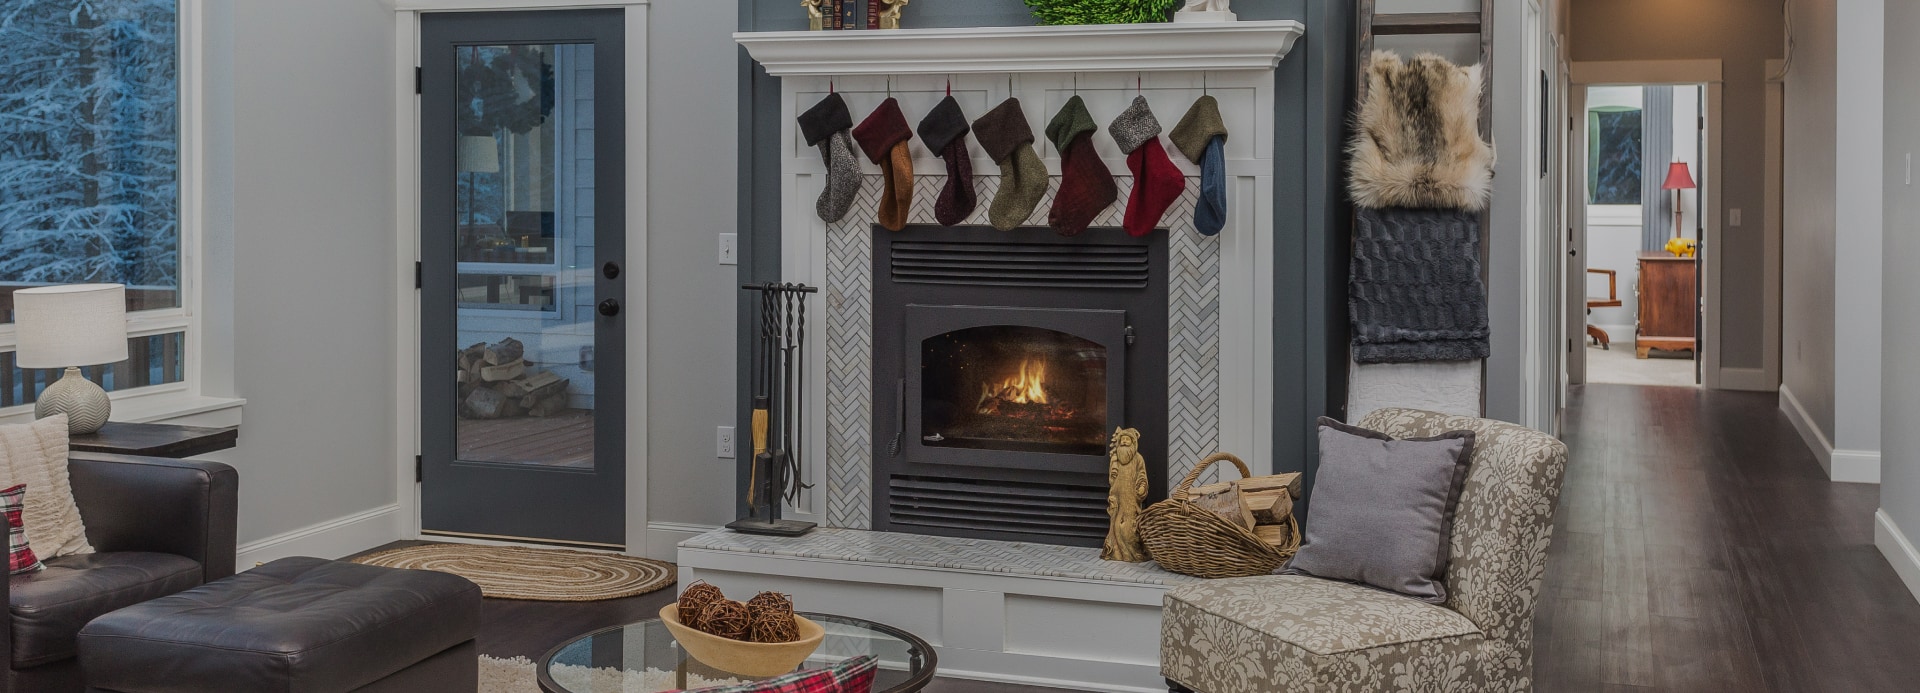 Renovated traditional fireplace with Christmas stockings